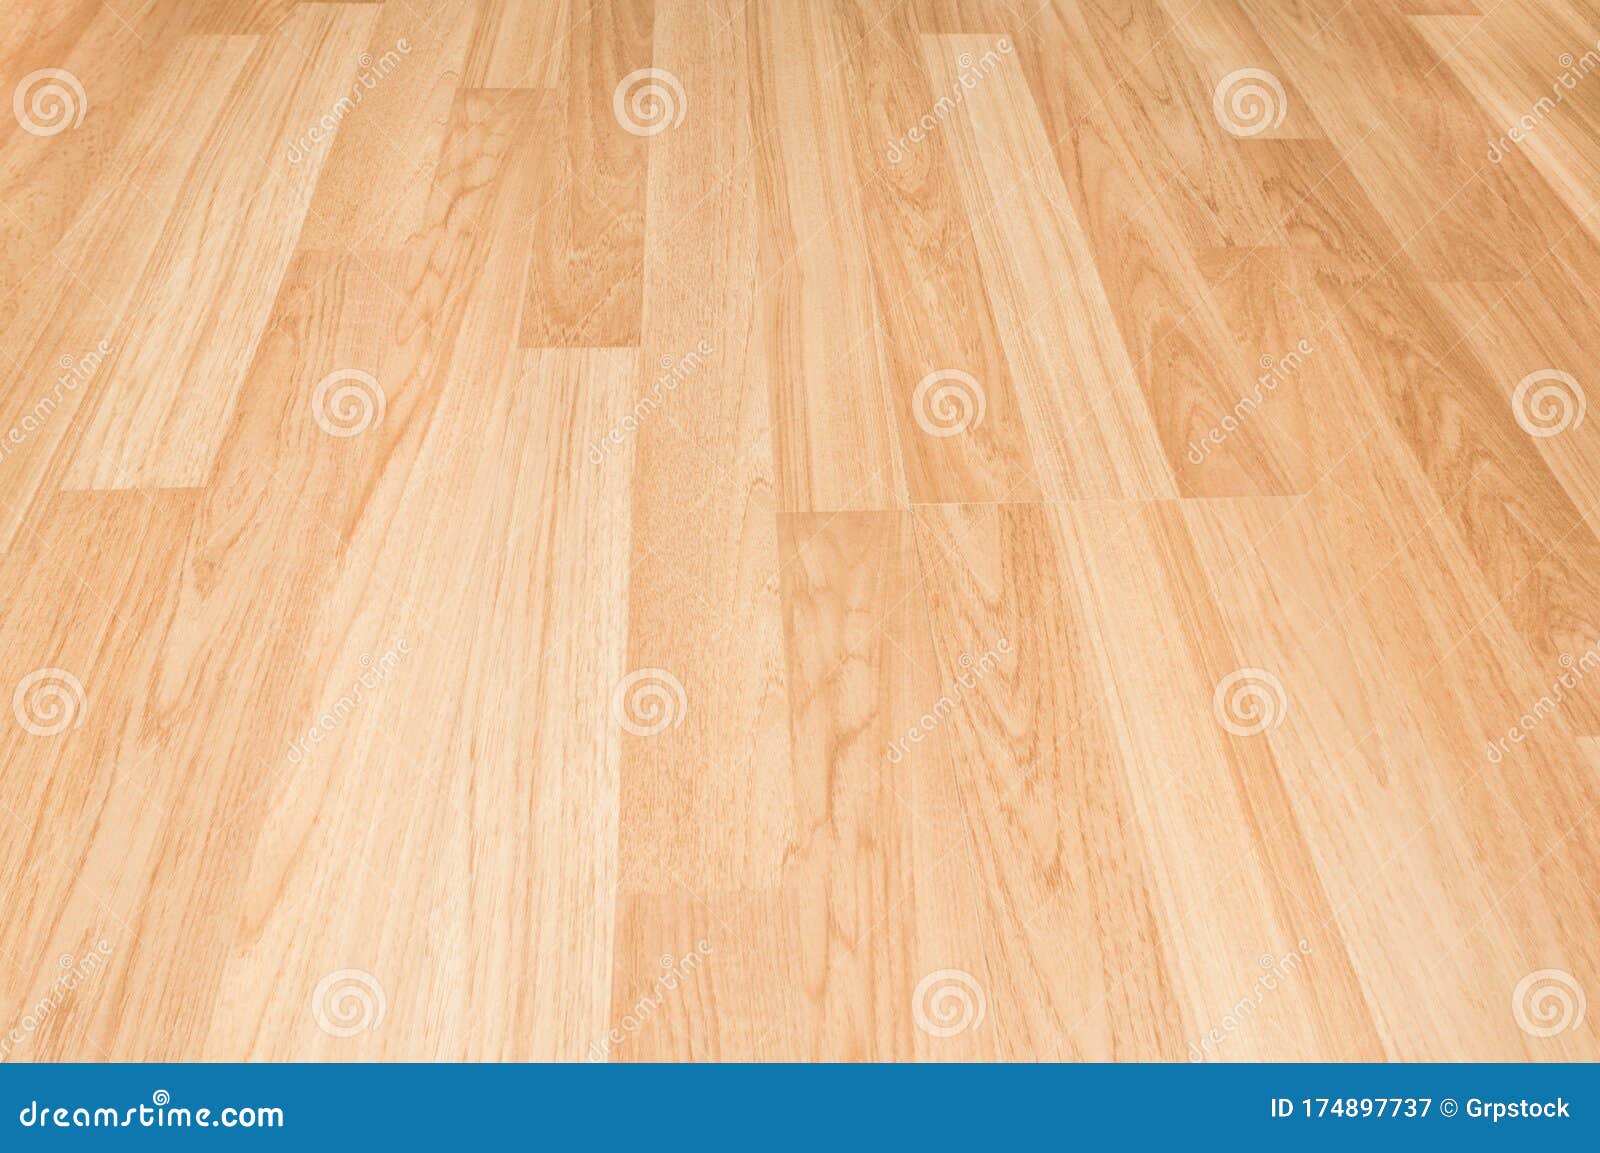 Light Oak Wooden Flooring Texture Background, Top View Of Smooth Brown